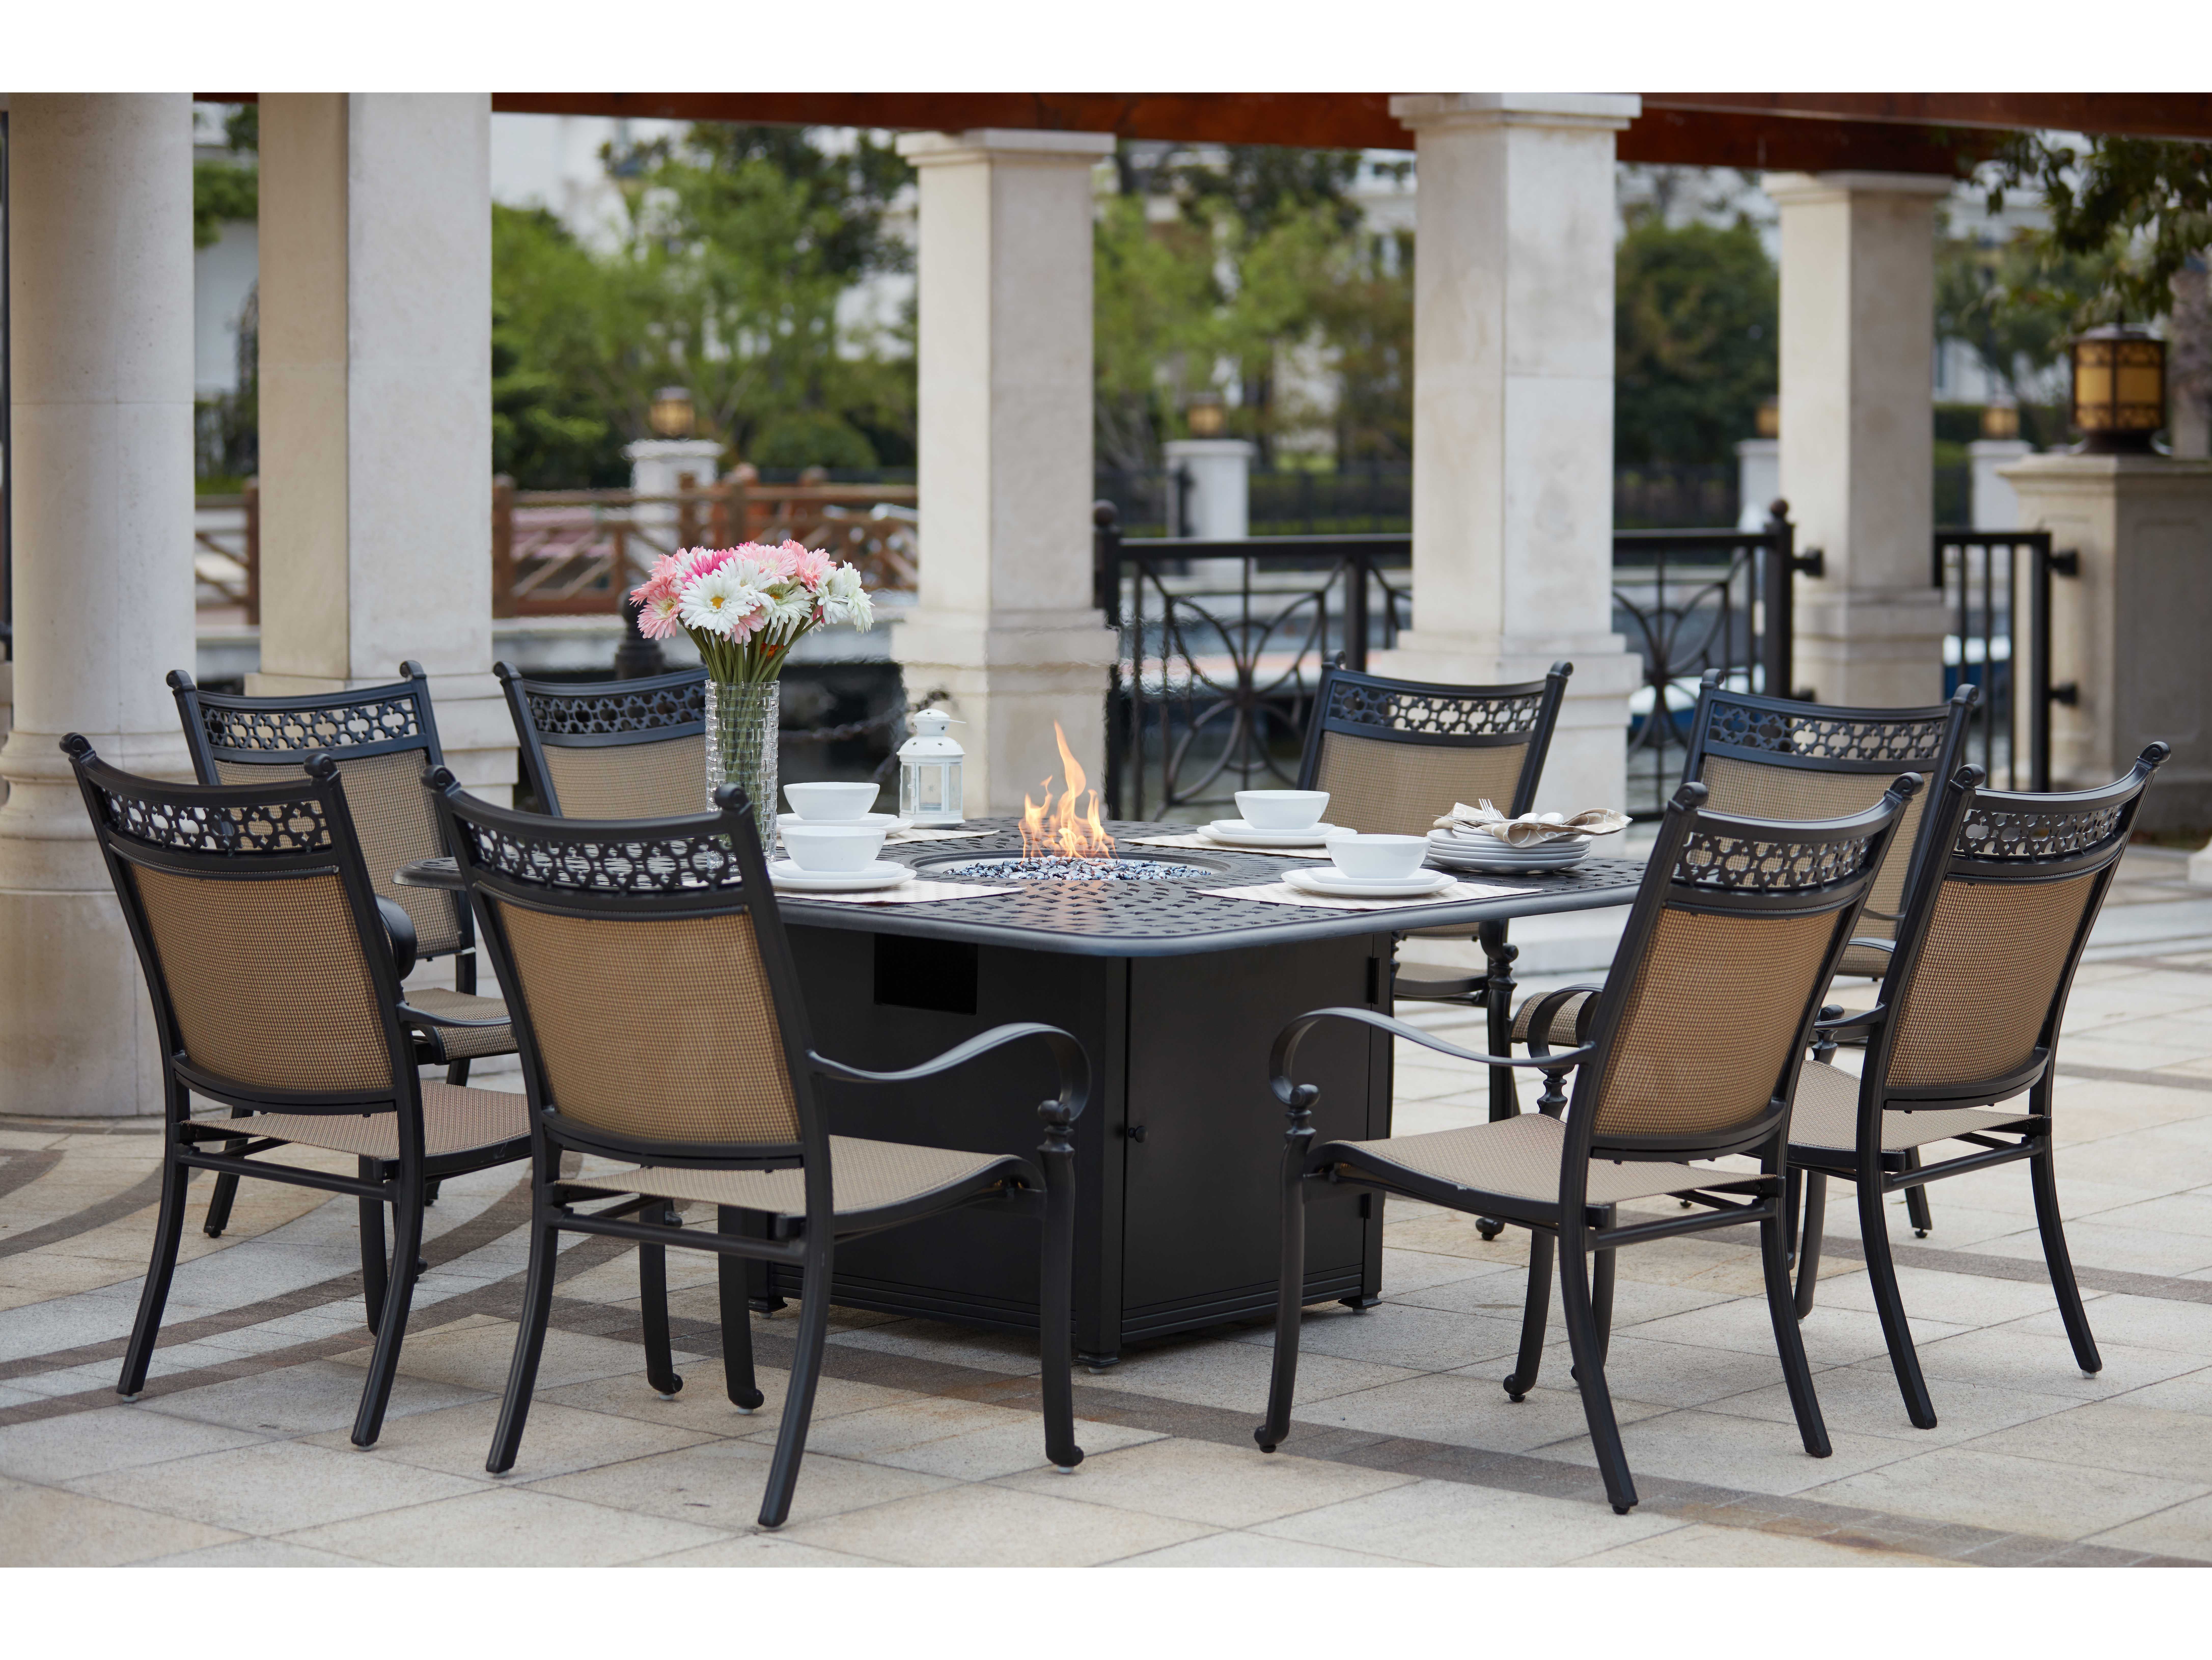 Propane Fire Pit Dining Set, 9 Piece Patio Dining Set With Fire Pit